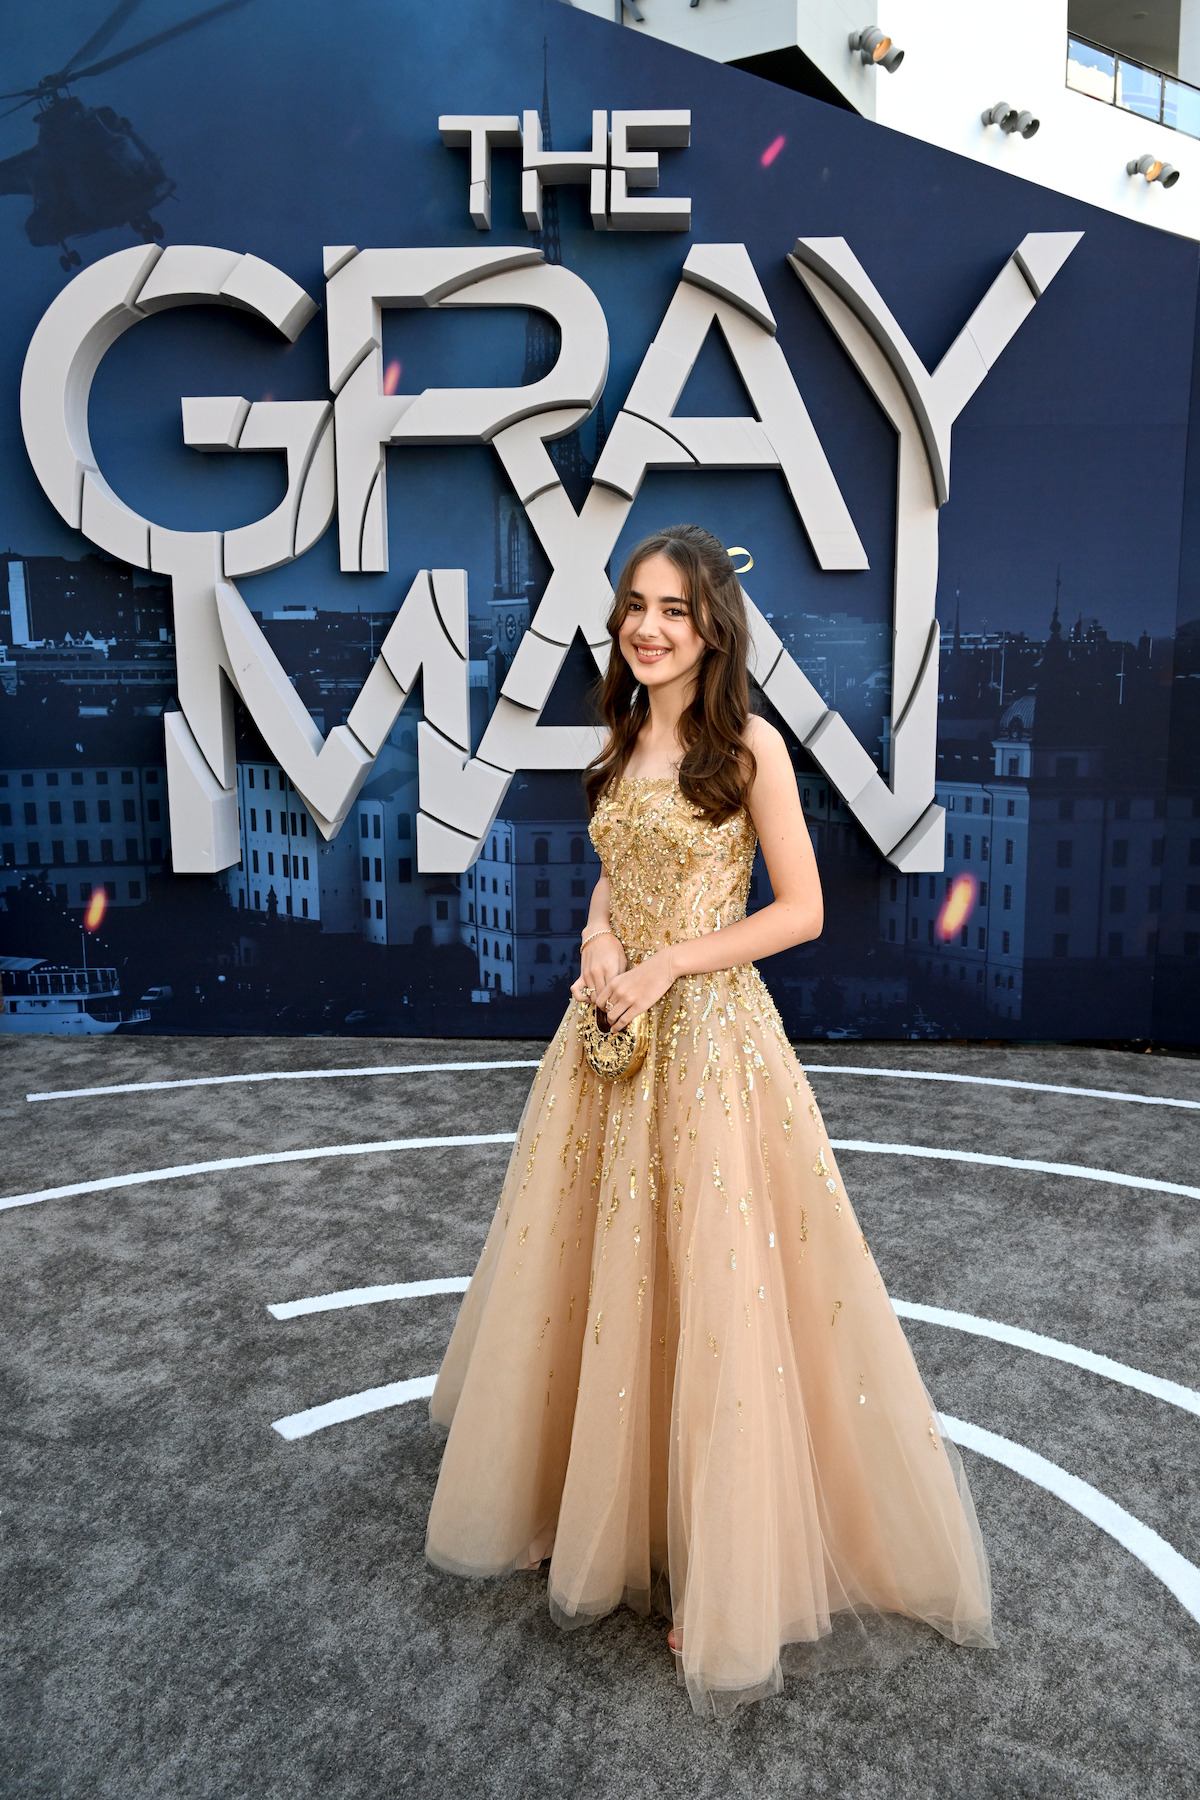 Regé-Jean Page hits the red carpet at The Gray Man premiere